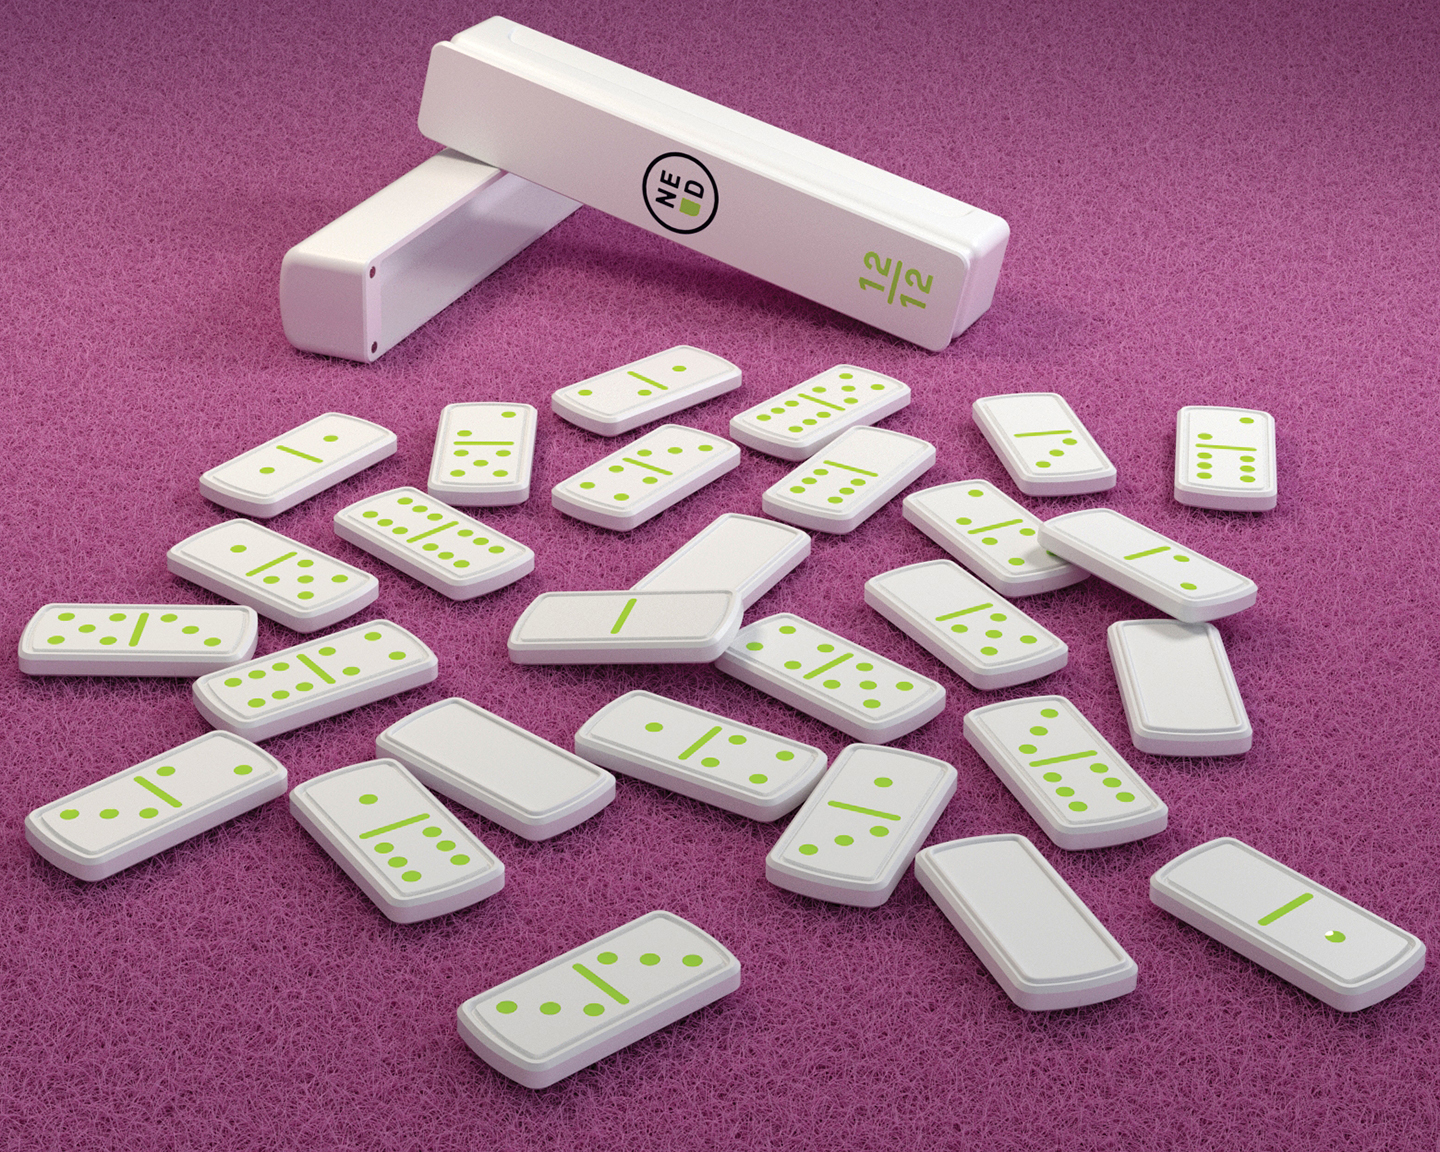 Ekmekjian designed The Domino Set, custom-produced on a 3-D printer and designed to snap together when stacked